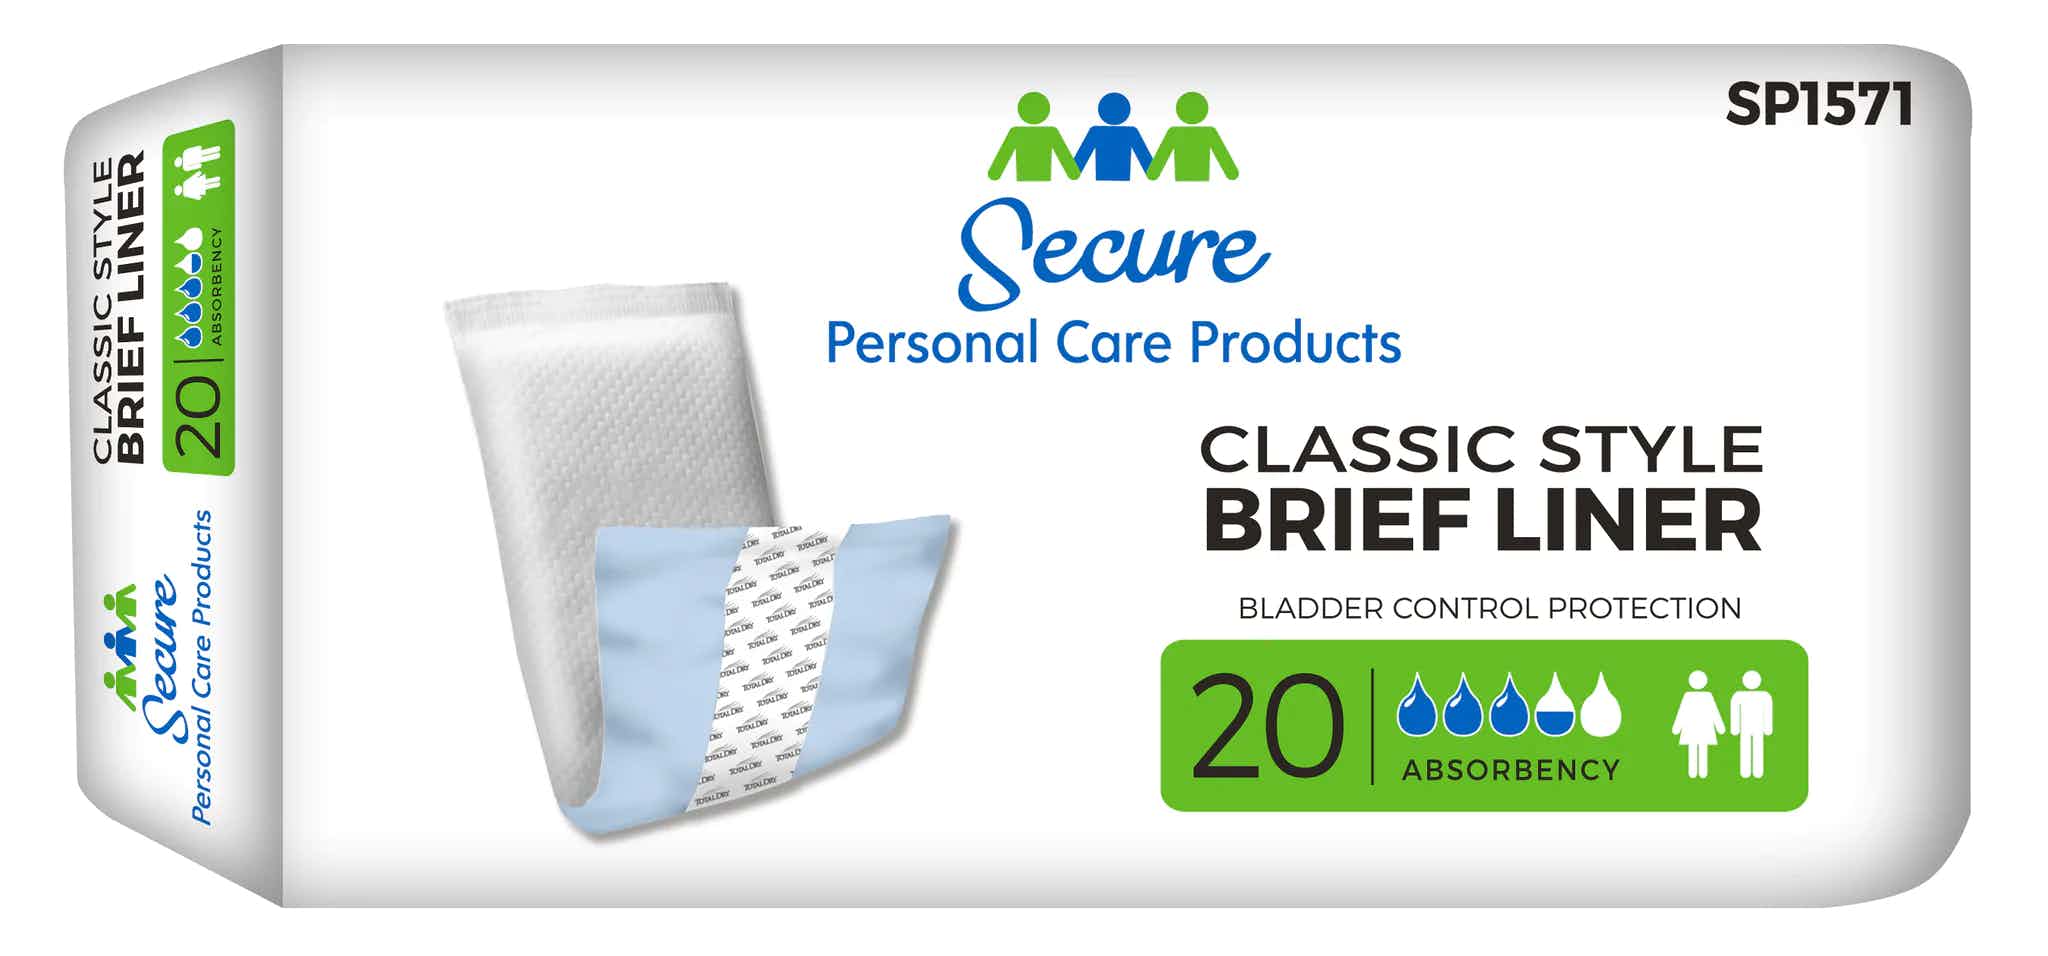 Secure Personal Care Products Classic Style Brief Liners, Moderate Absorbency, SP1571, Medium (4 X 13") - Case of 180 Diapers (9 Bags)